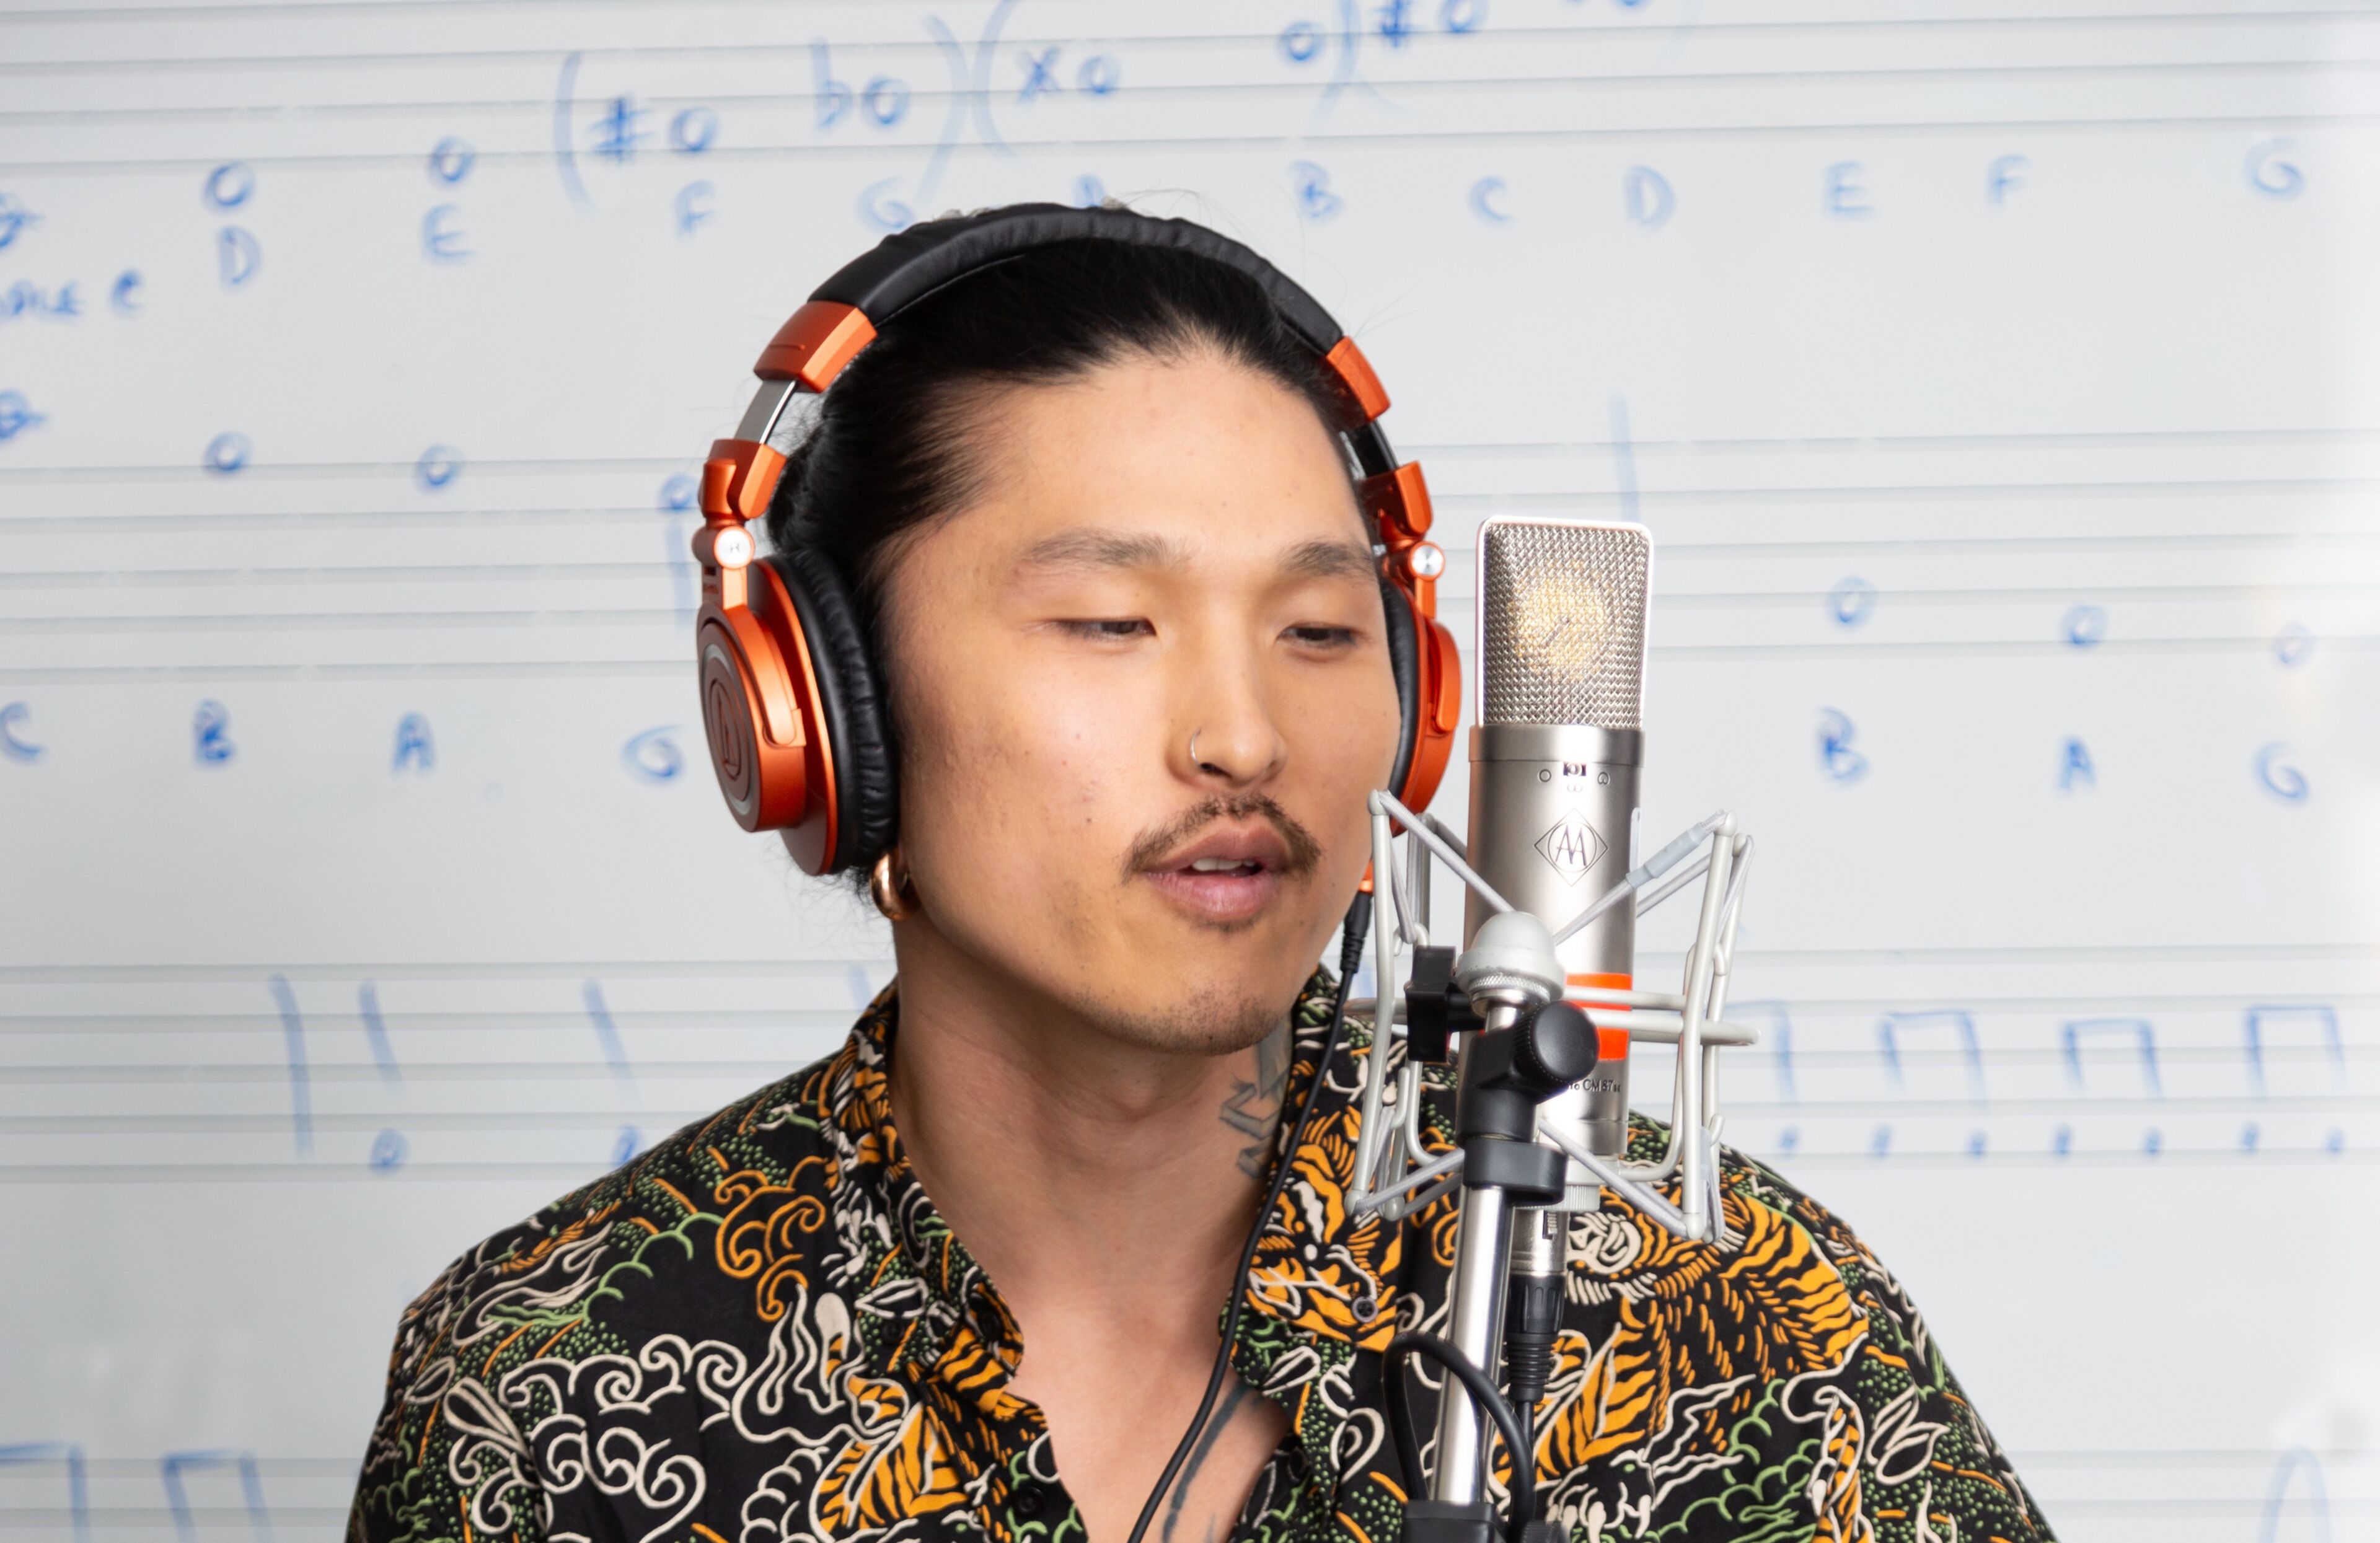 A tattooed man in an ornate shirt singing into a studio microphone with headphones.